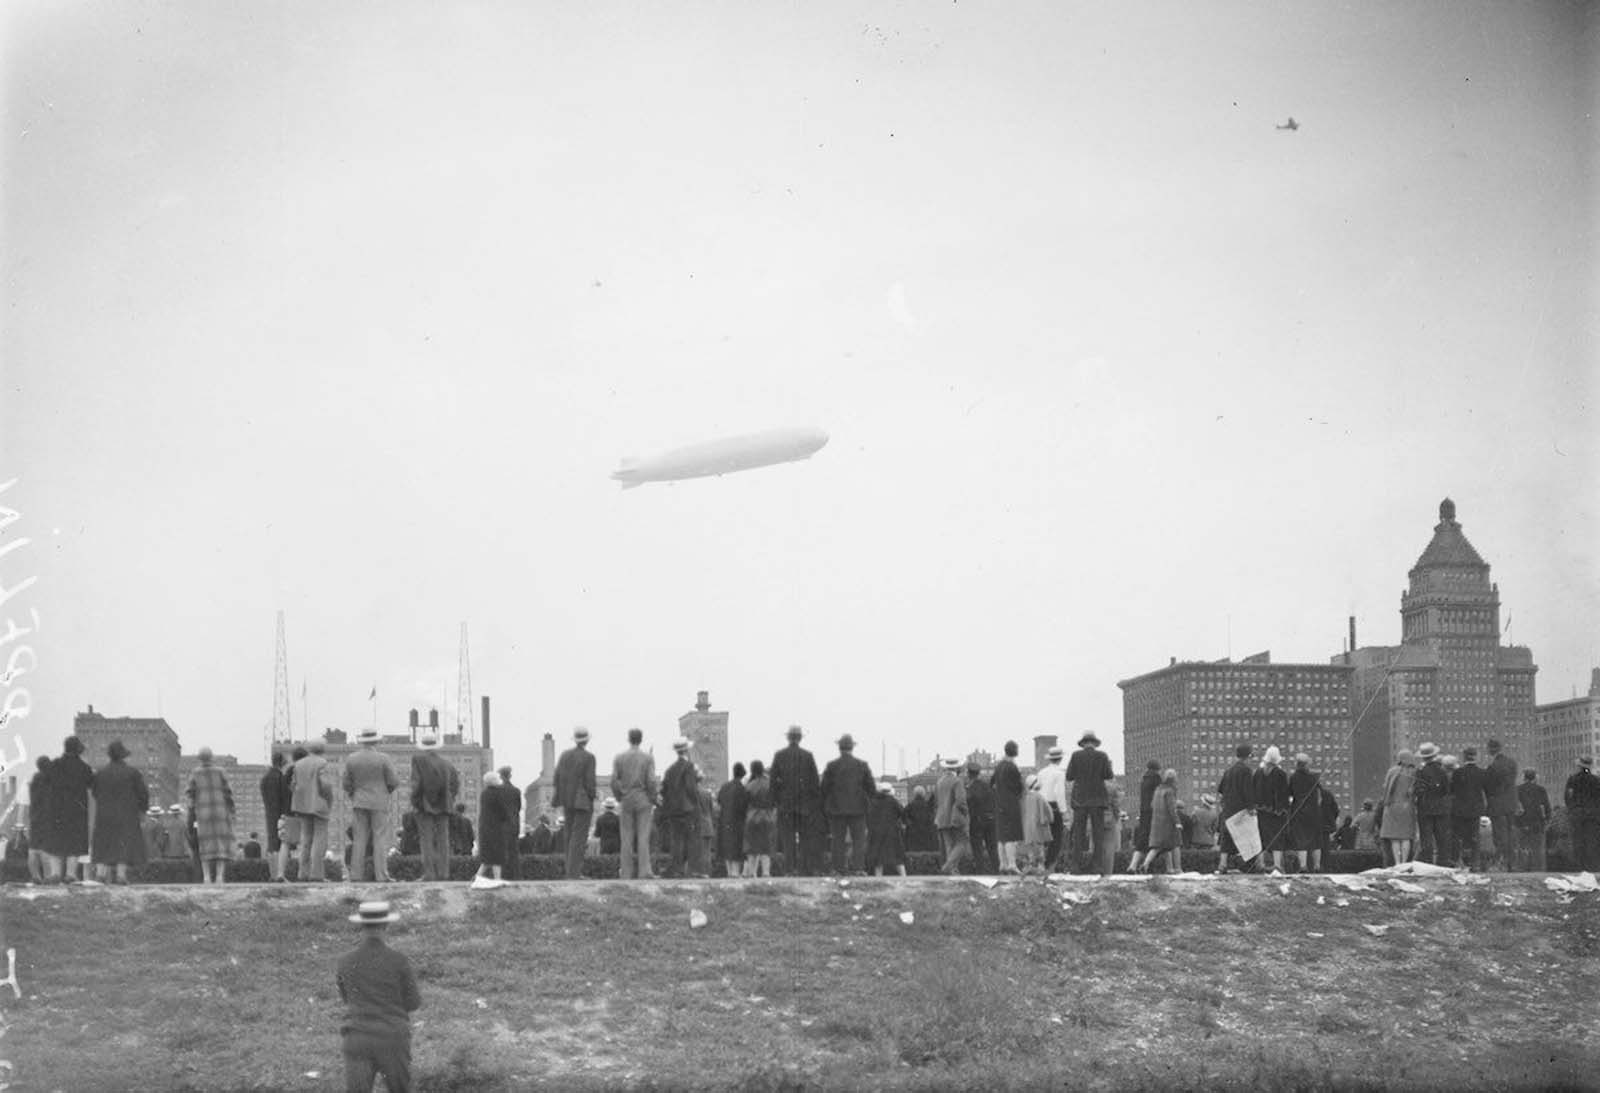 The Graf Zeppelin viewed at an angle flying over the Loop community area of Chicago.